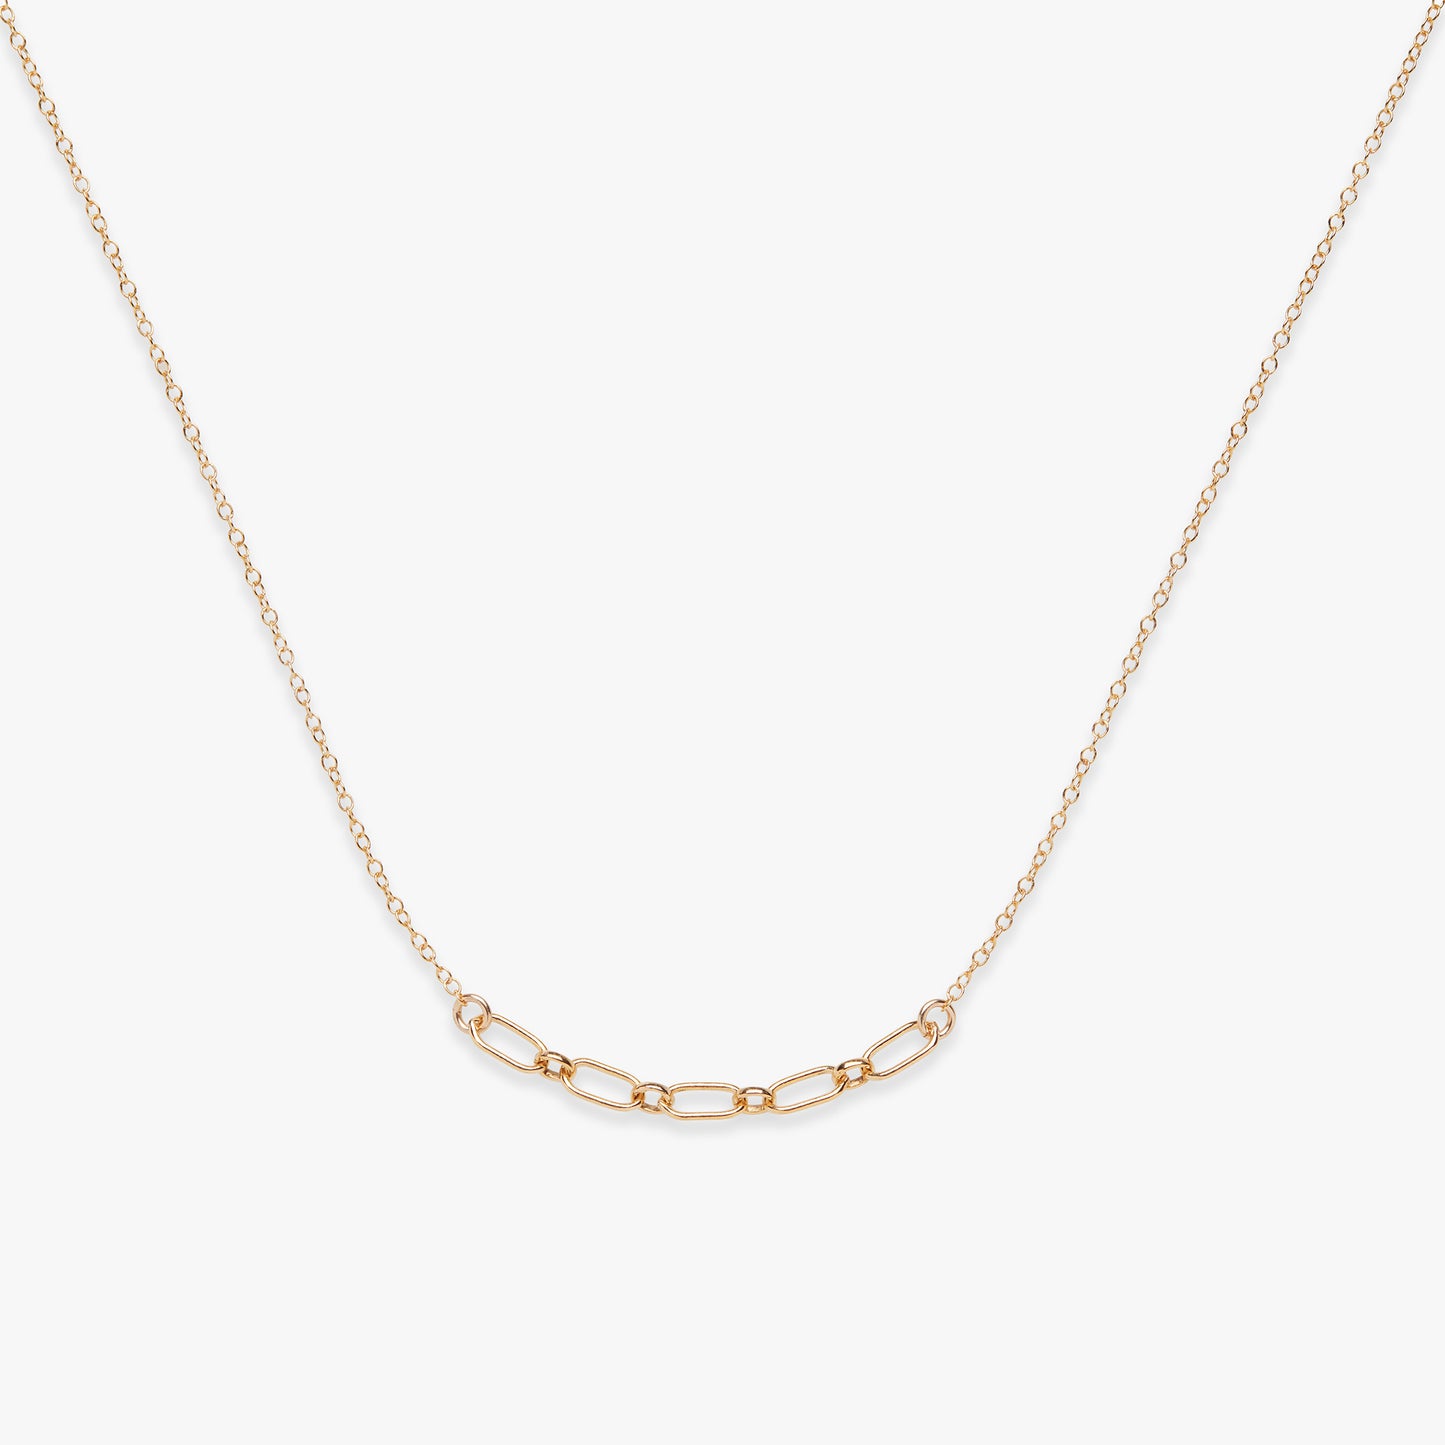 Oval links ketting gold filled